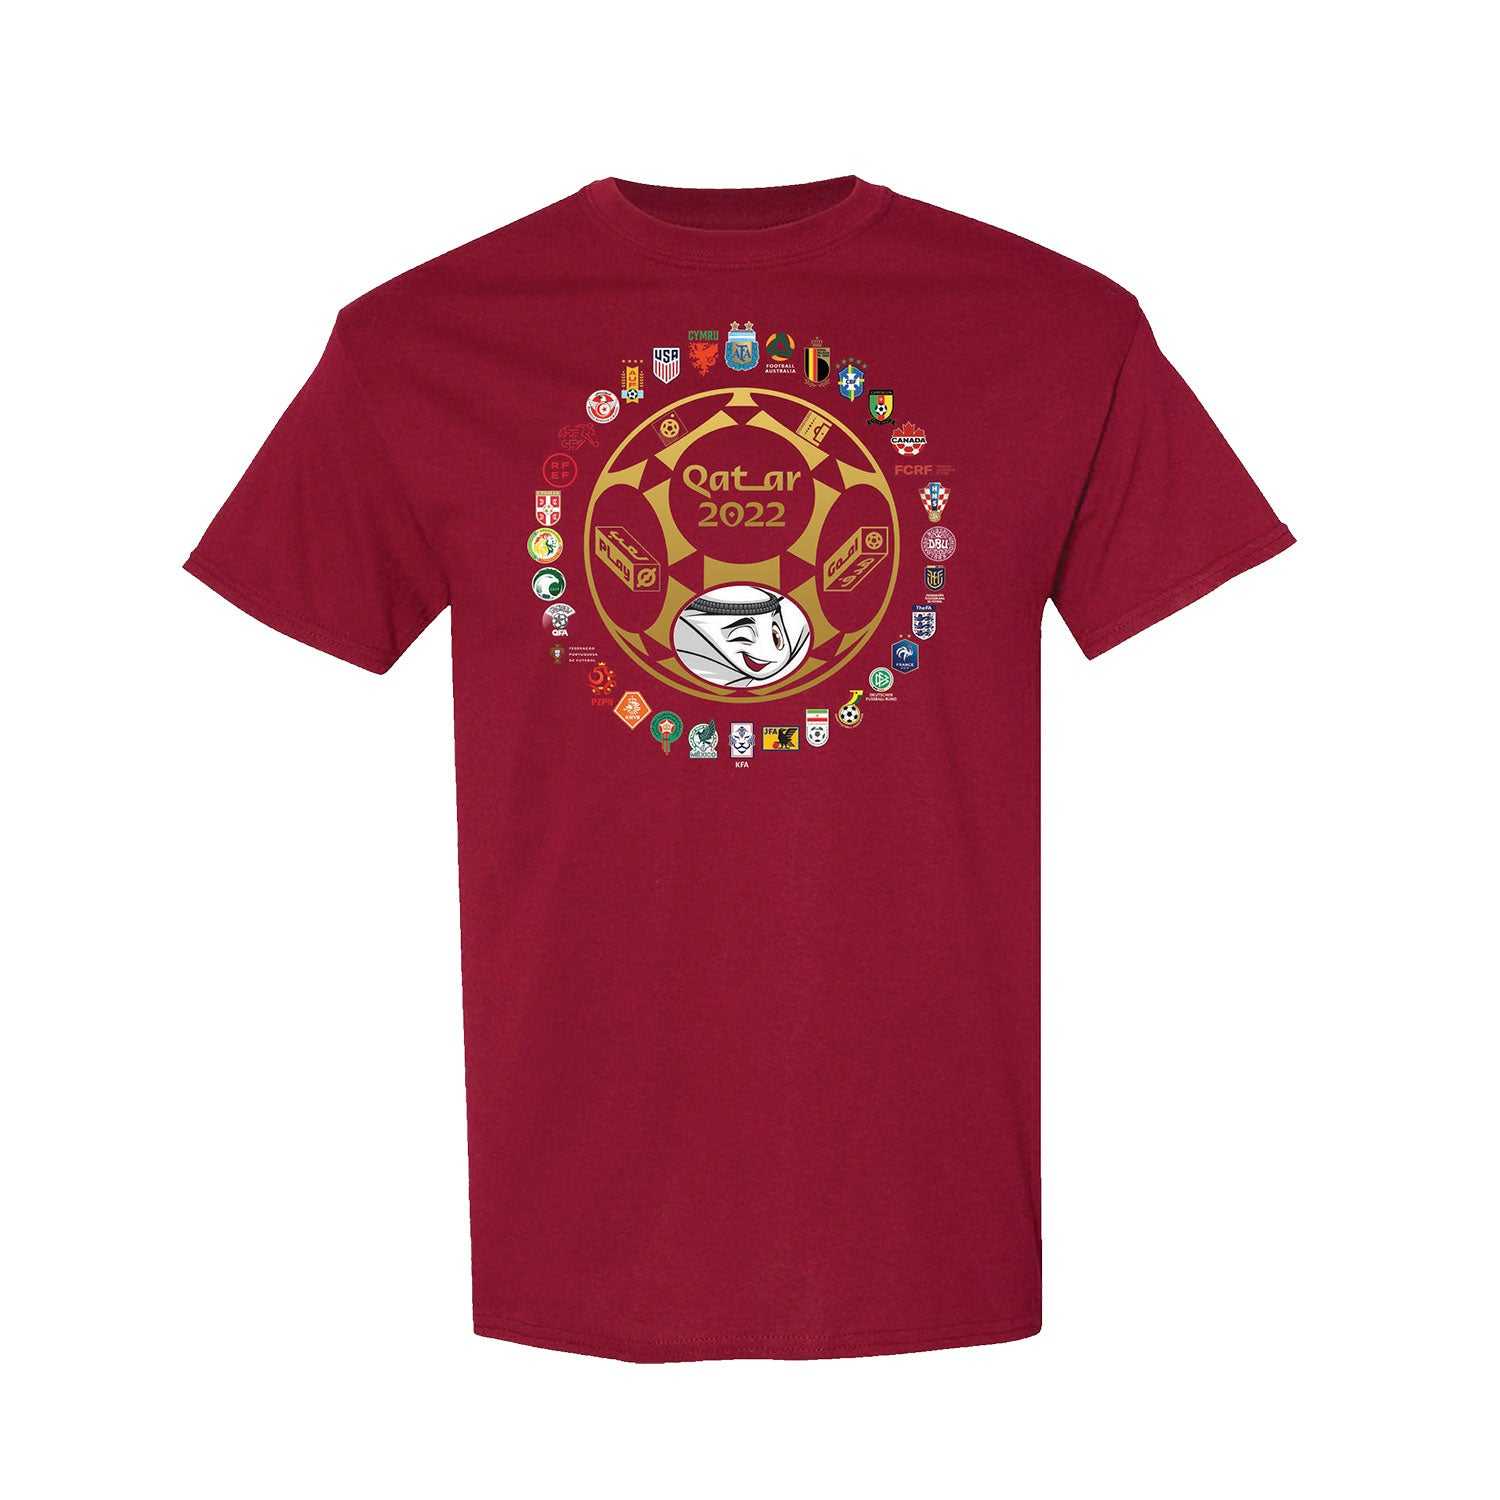 World Cup 2022 32 Federations Tee Red - Men's